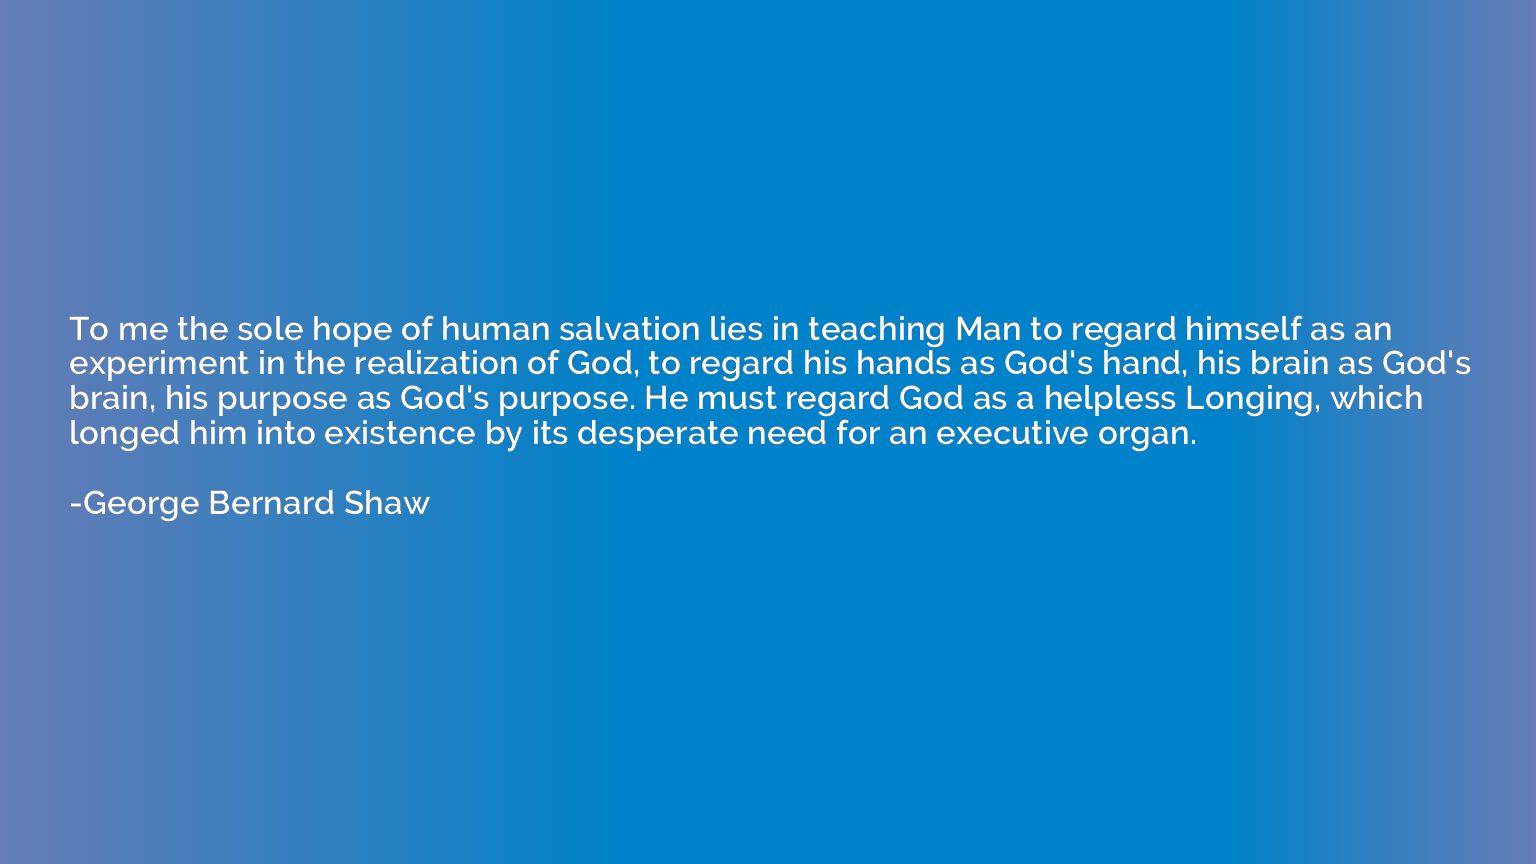 To me the sole hope of human salvation lies in teaching Man 